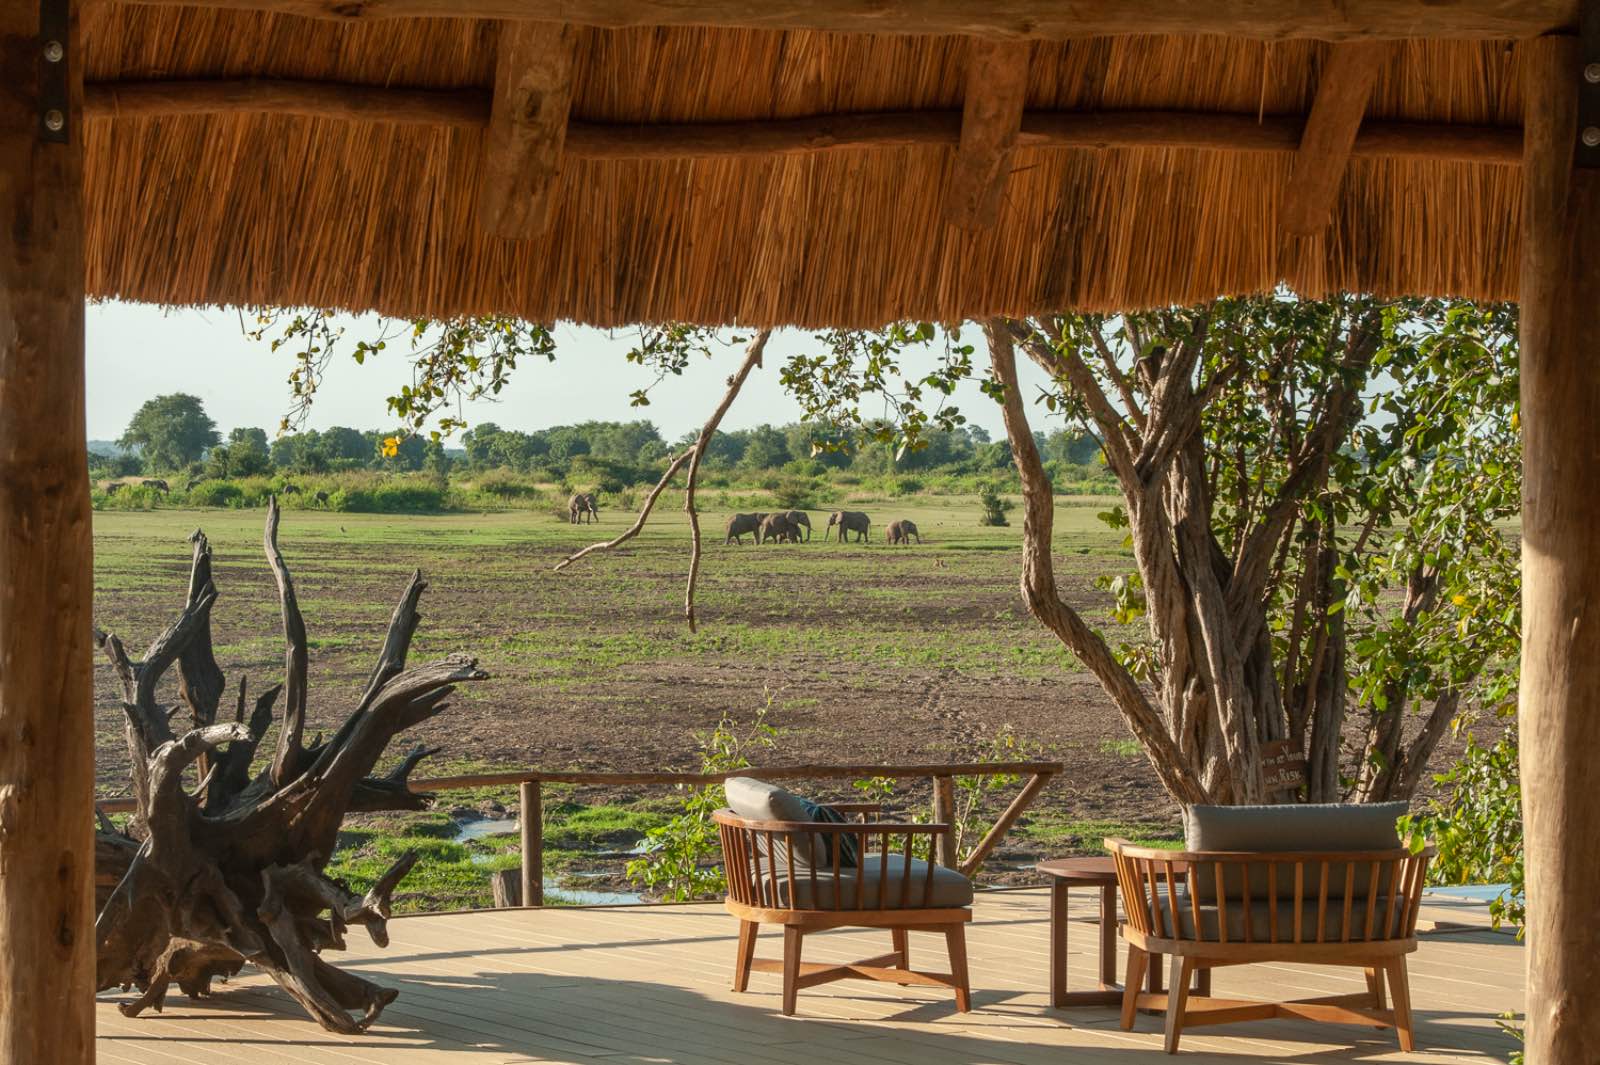 Watching elephants from the deck at Kafunta River Lodge